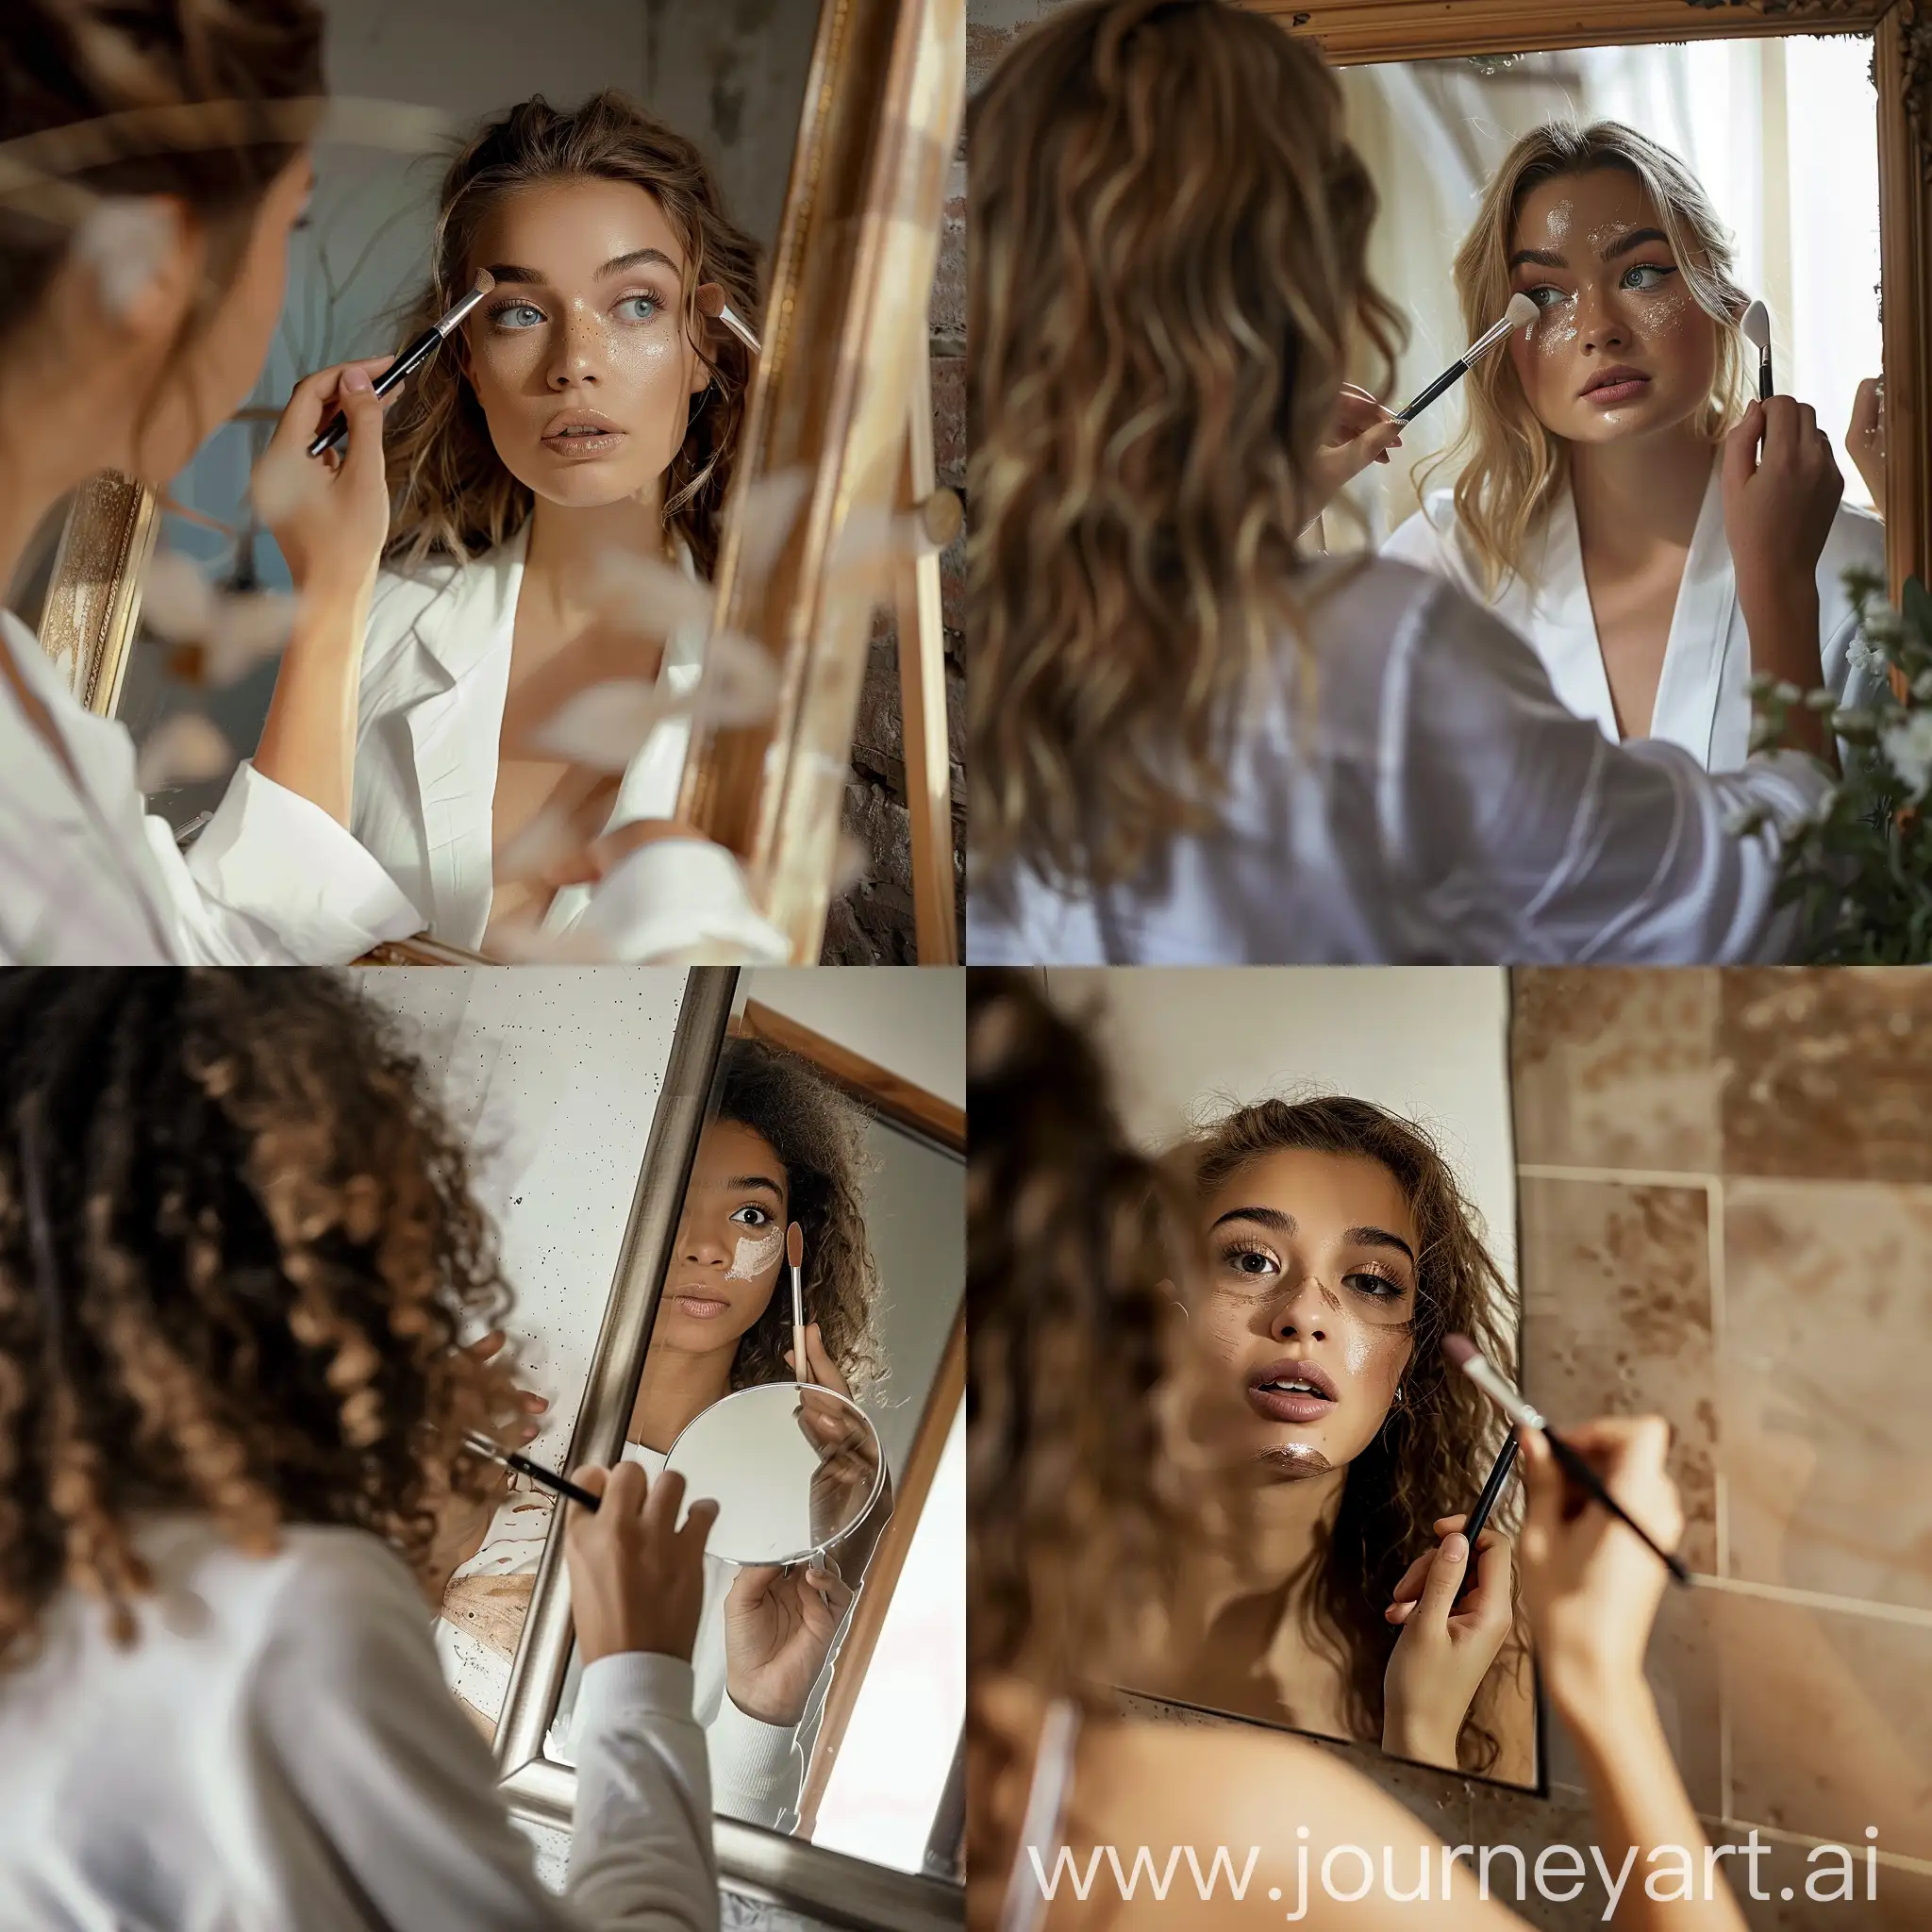 Elegant-Couple-Admiring-Themselves-in-a-Mirror-While-Applying-Makeup